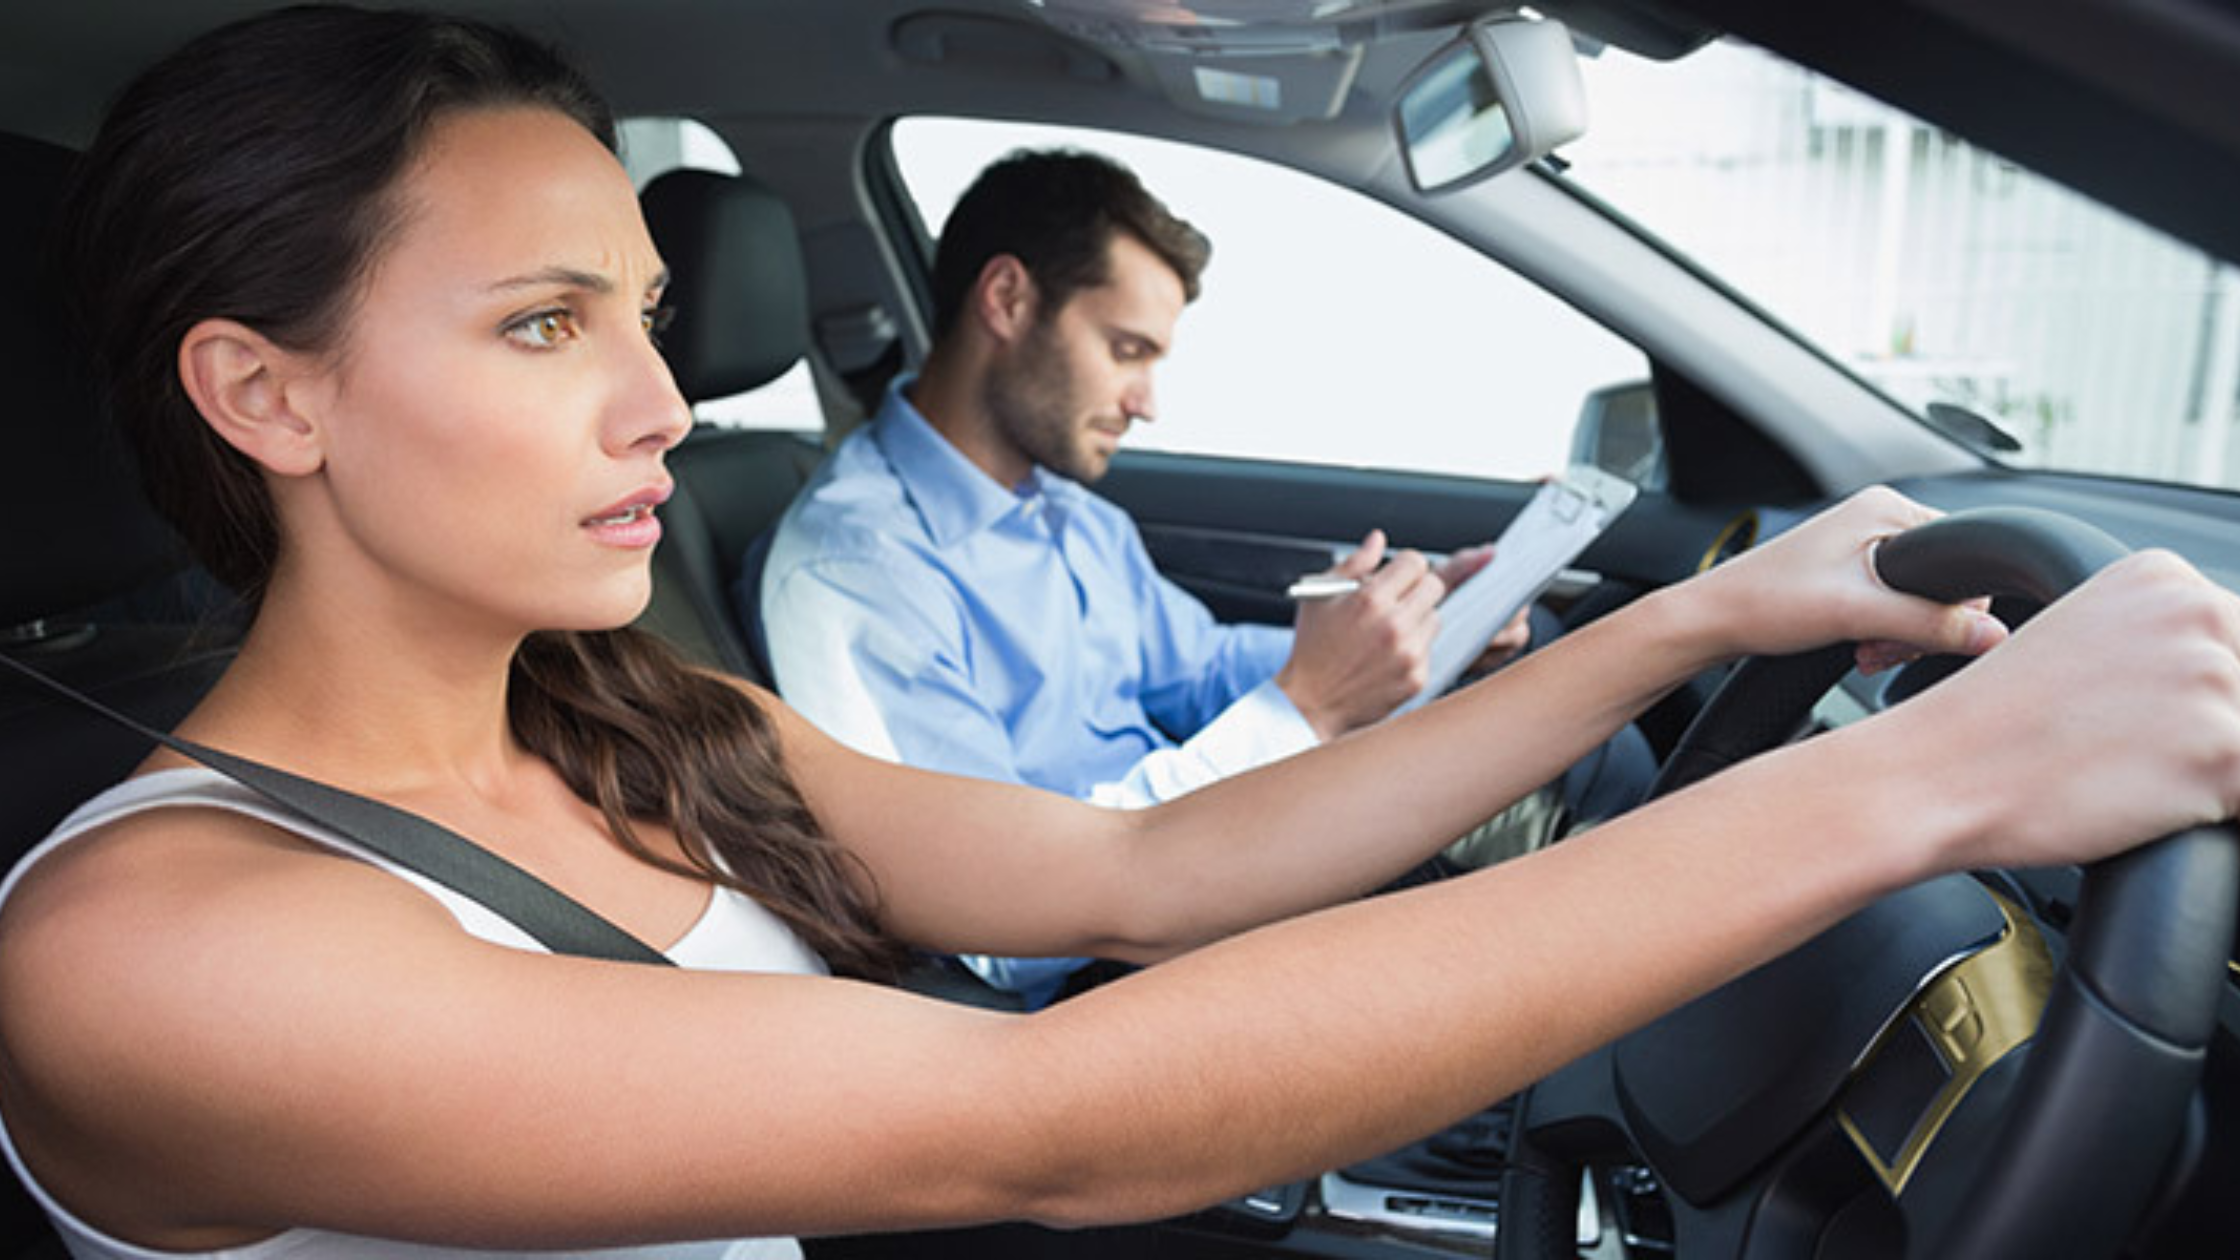 If you're one of the many people who get nervous behind the wheel, don't worry: you're not alone